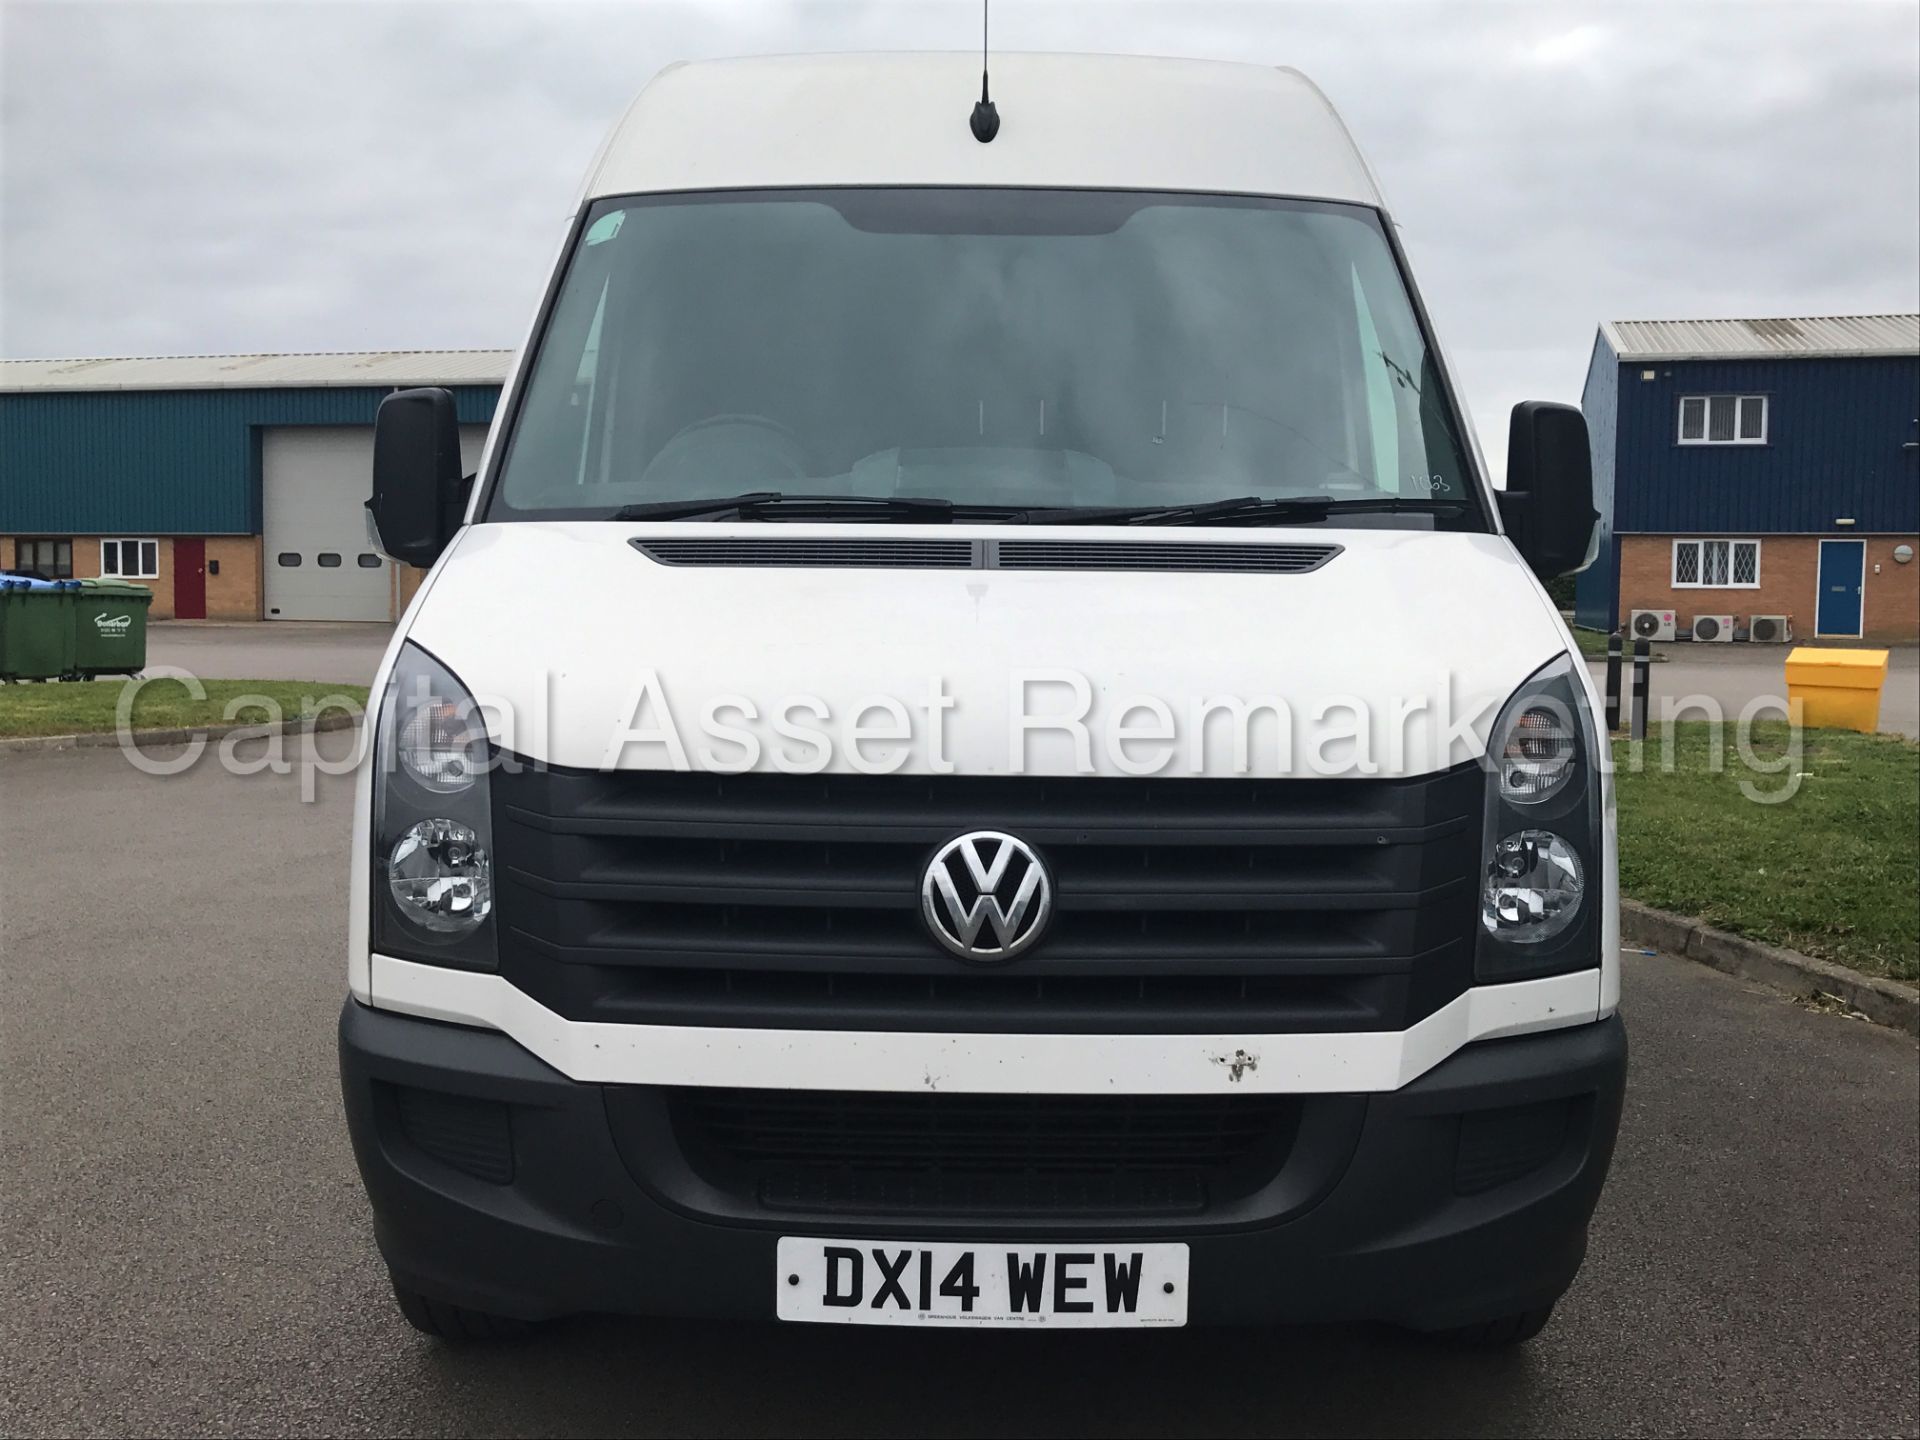 VOLKSWAGEN CRAFTER CR35 'MWB HI-ROOF' (2014) '2.0 TDI - 109 PS - 6 SPEED' *1 COMPANY OWNER FROM NEW* - Image 2 of 19